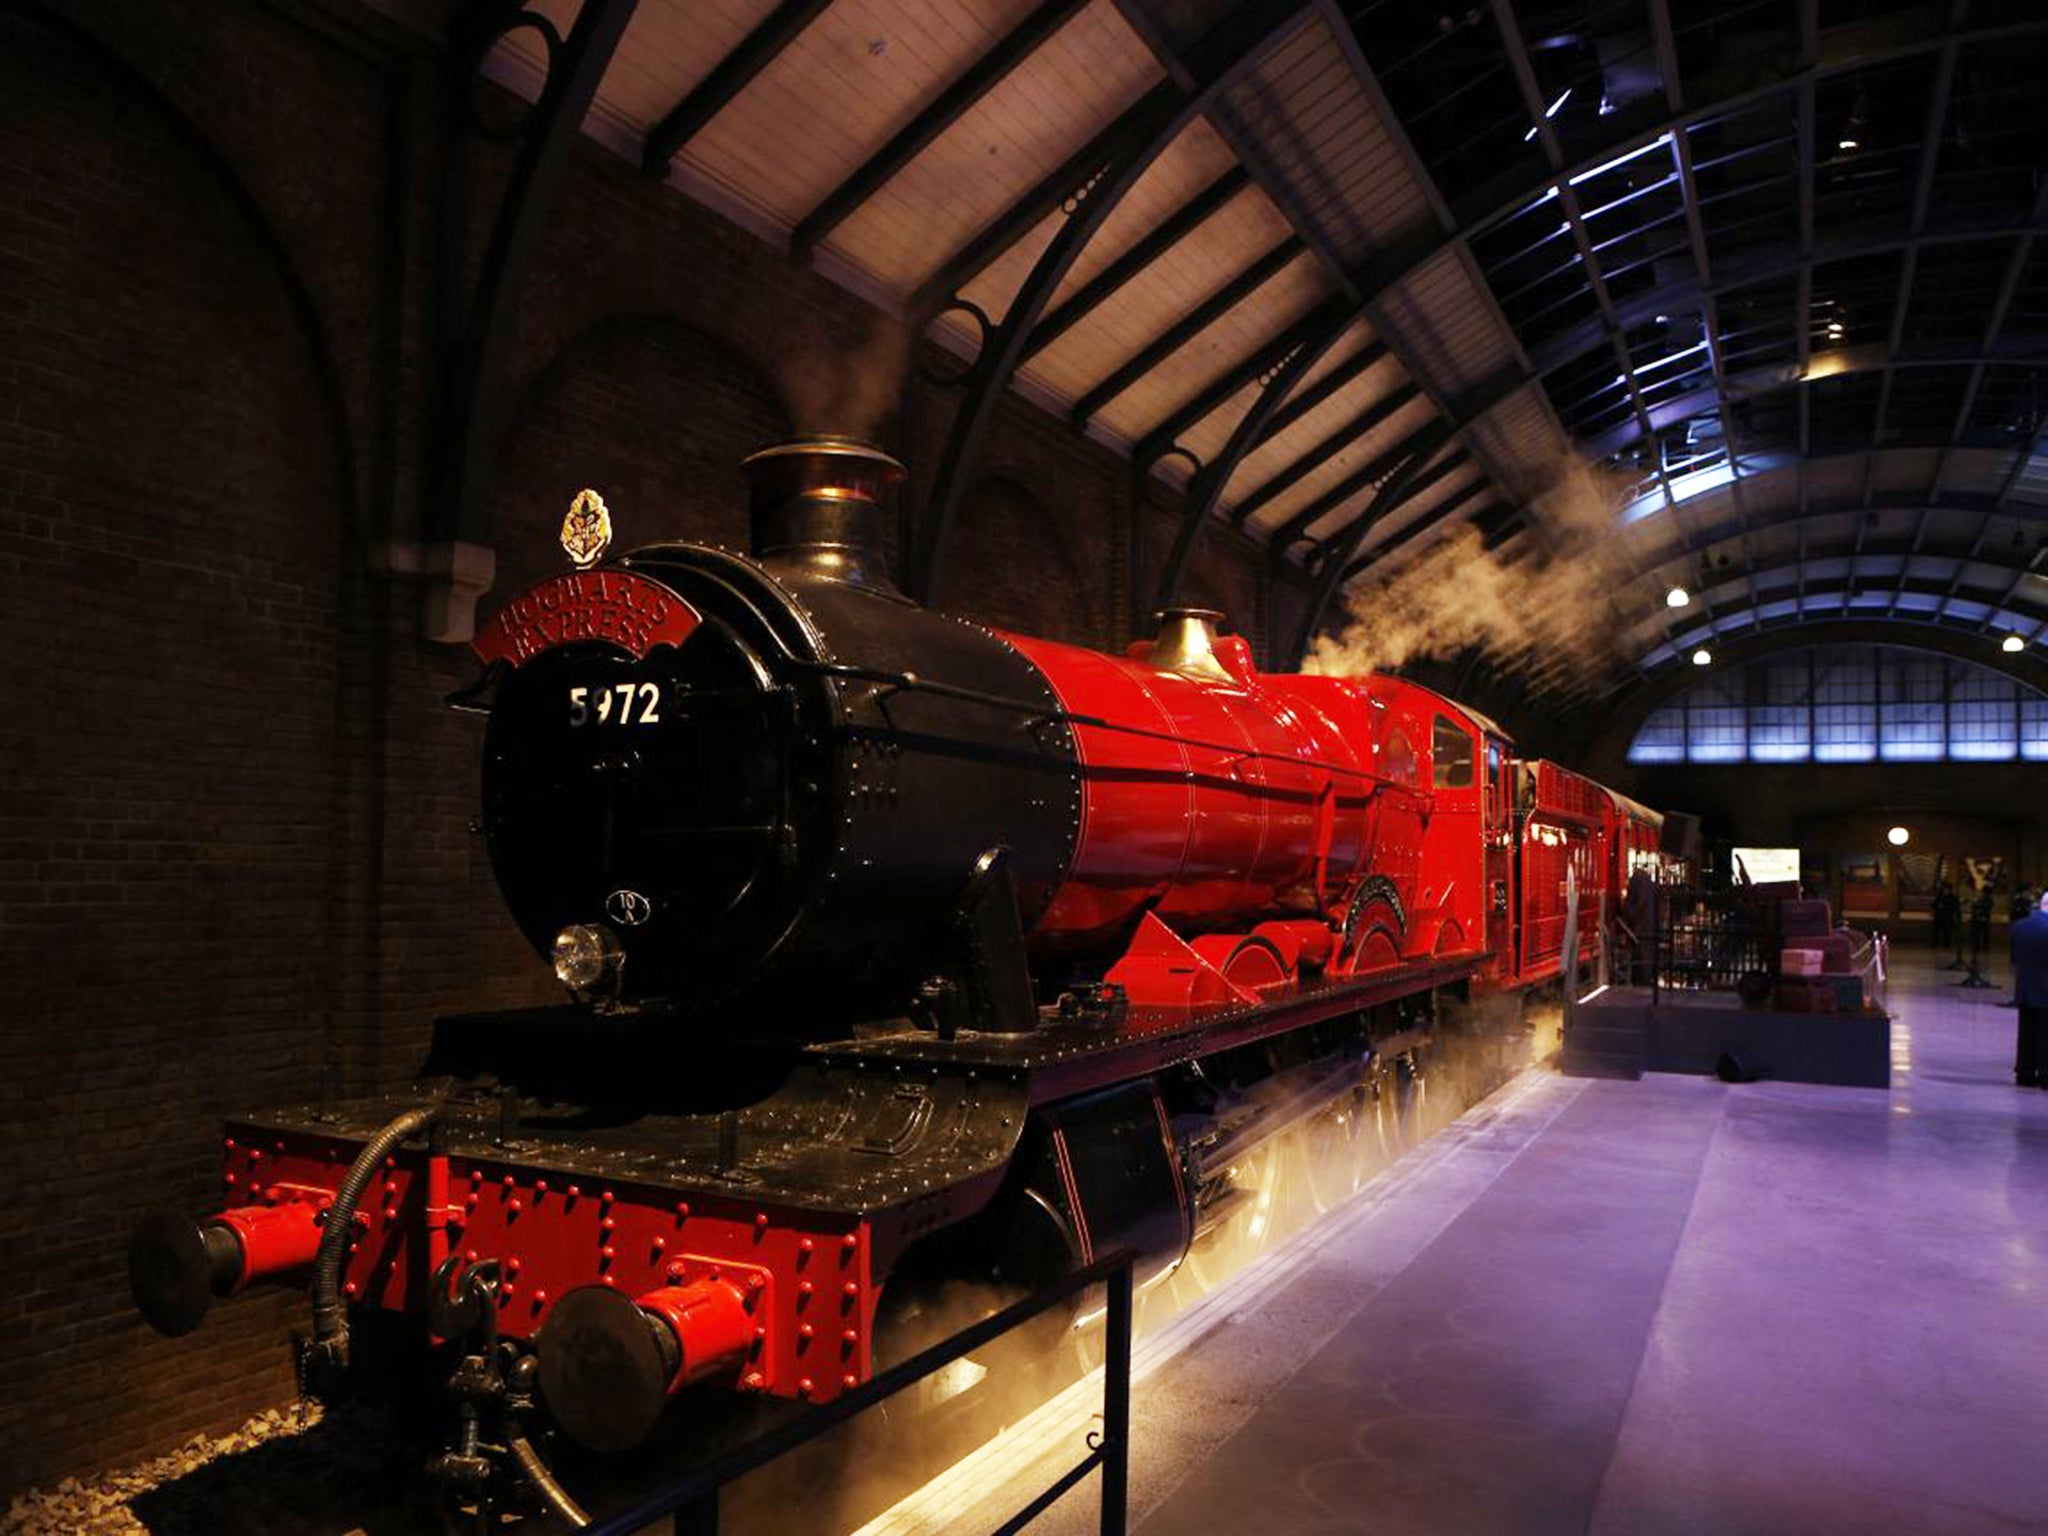 Search engine: the ‘Hogwart’s Express’ steam train was the most requested addition to the Harry Potter studio tour